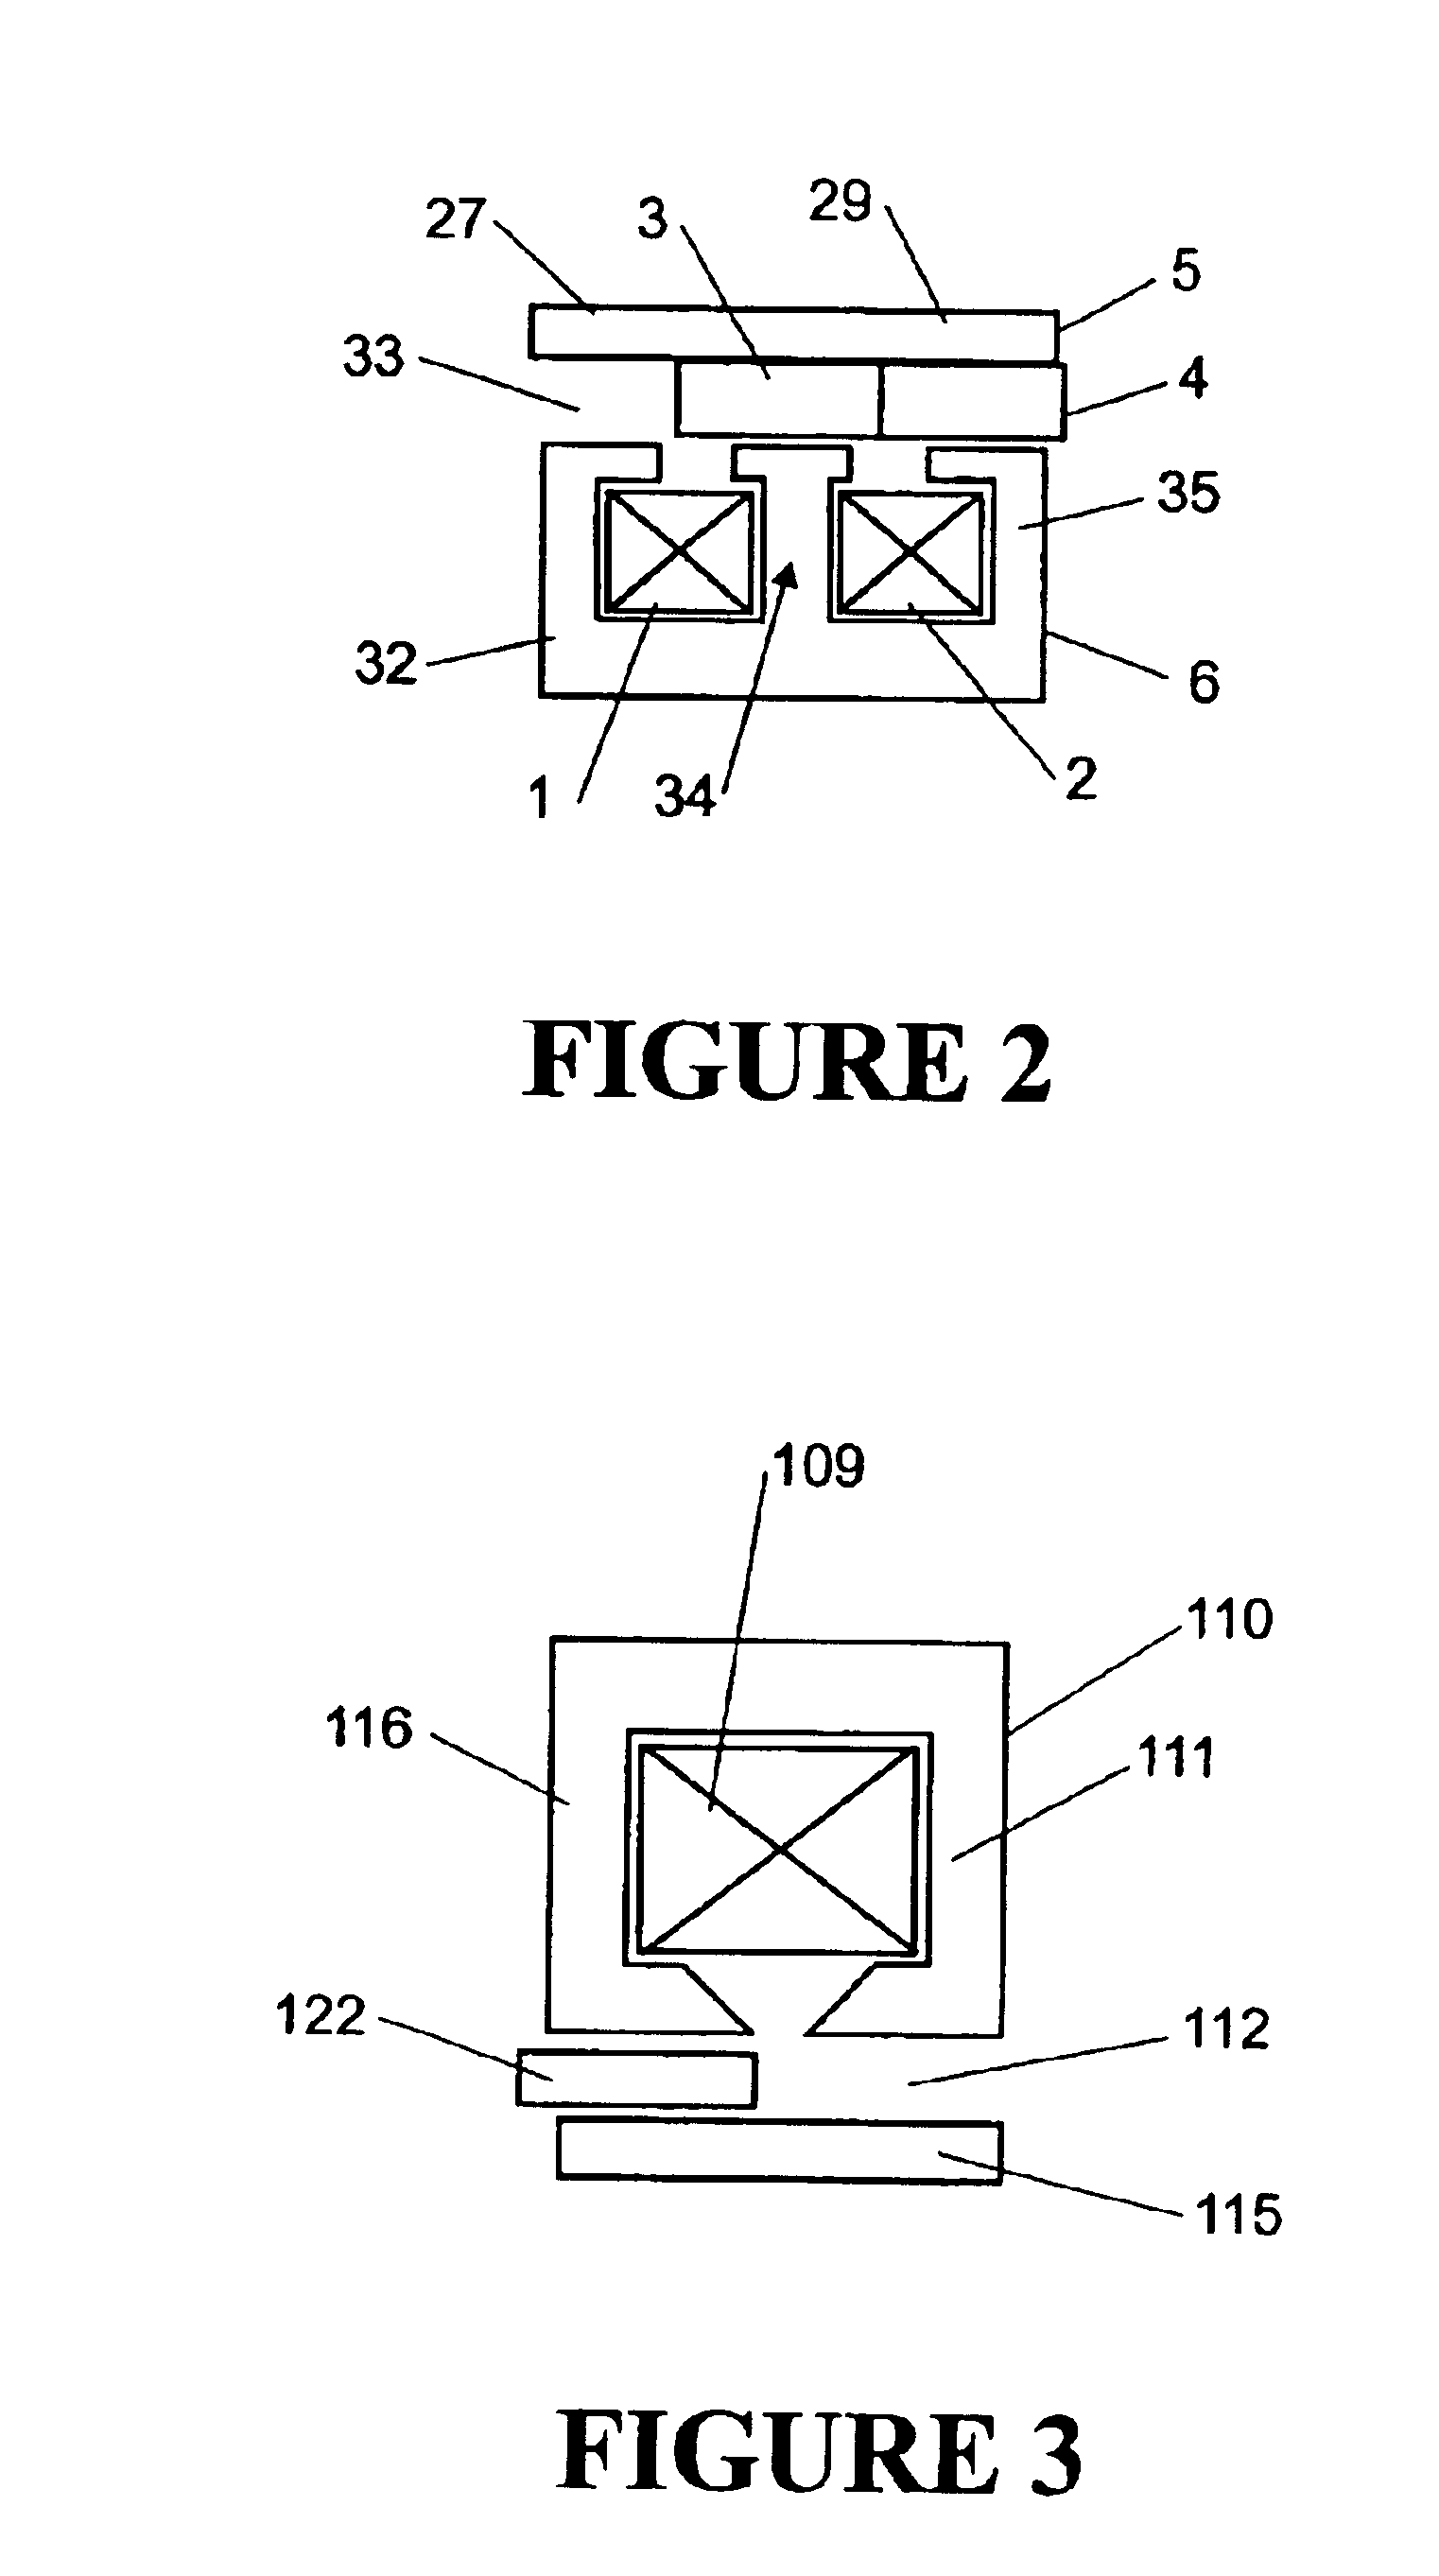 Method of controlling a reciprocating linear motor